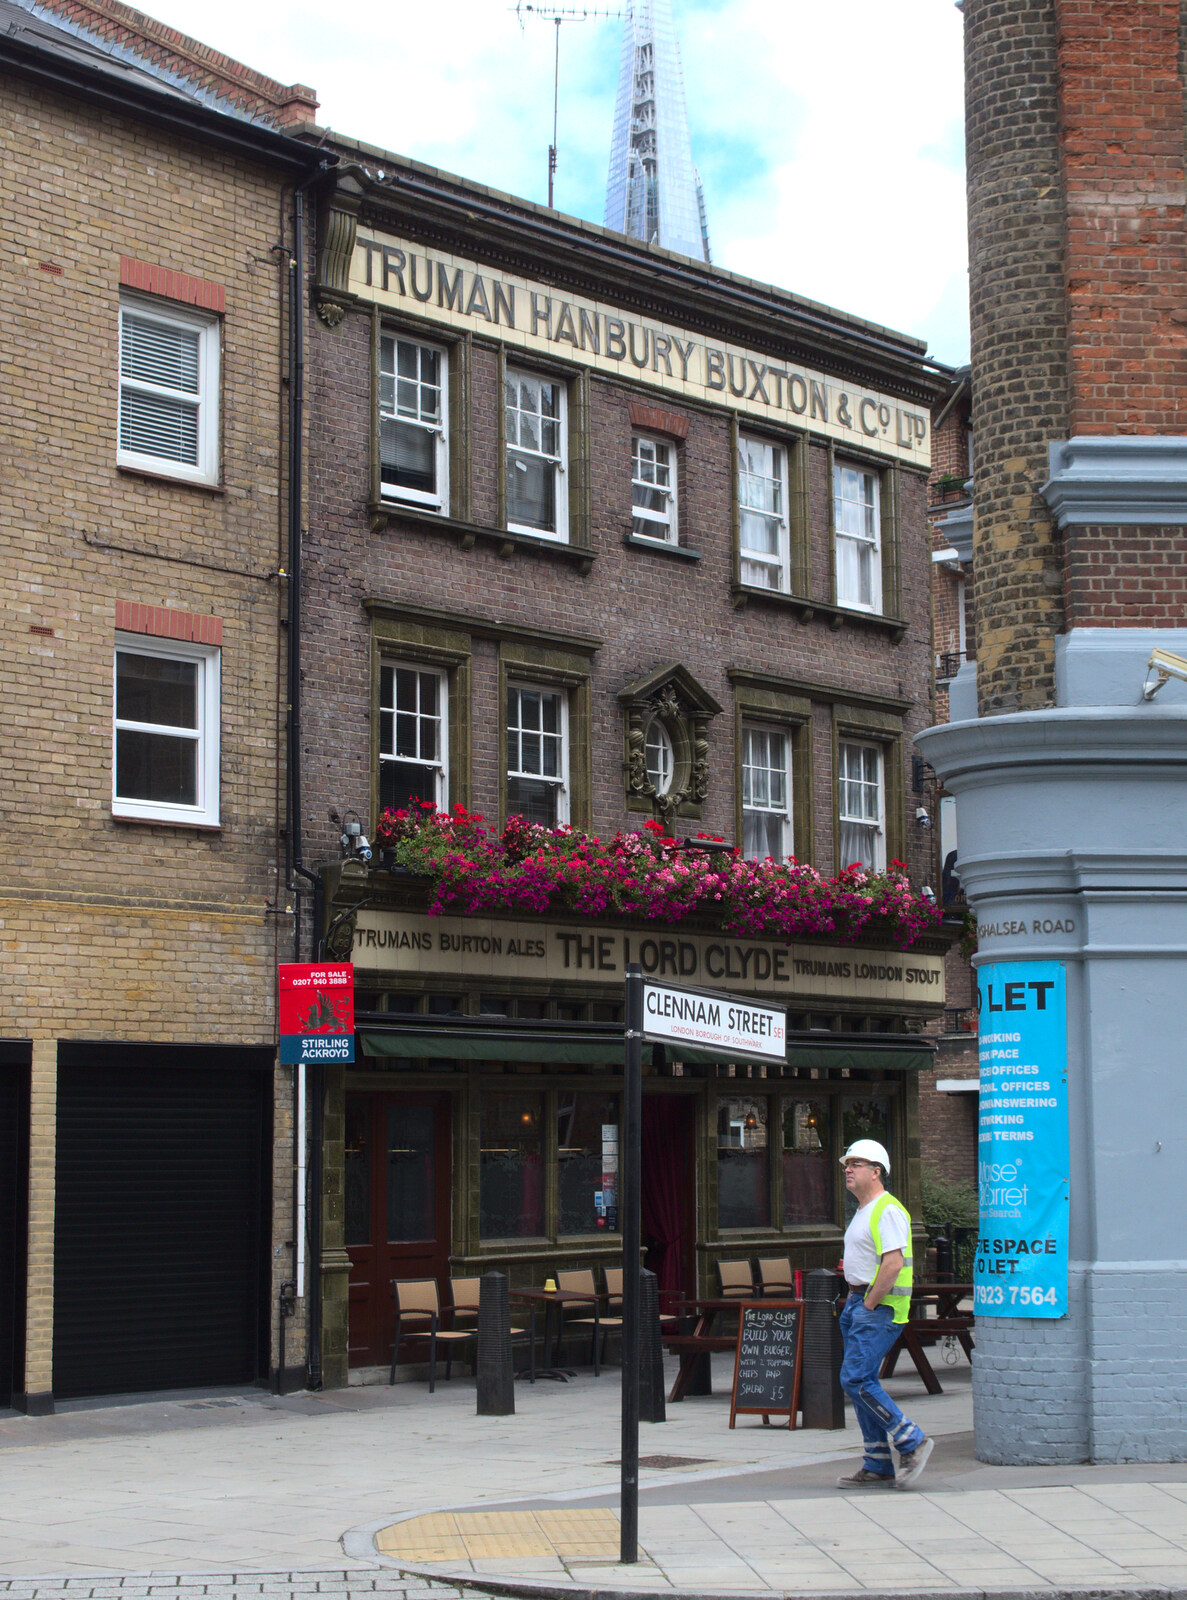 The Lord Clyde - once Truman Hanbury and Buxton from SwiftKey Innovation Day, and Pizza Pub, Westminster and Southwark - 14th August 2014